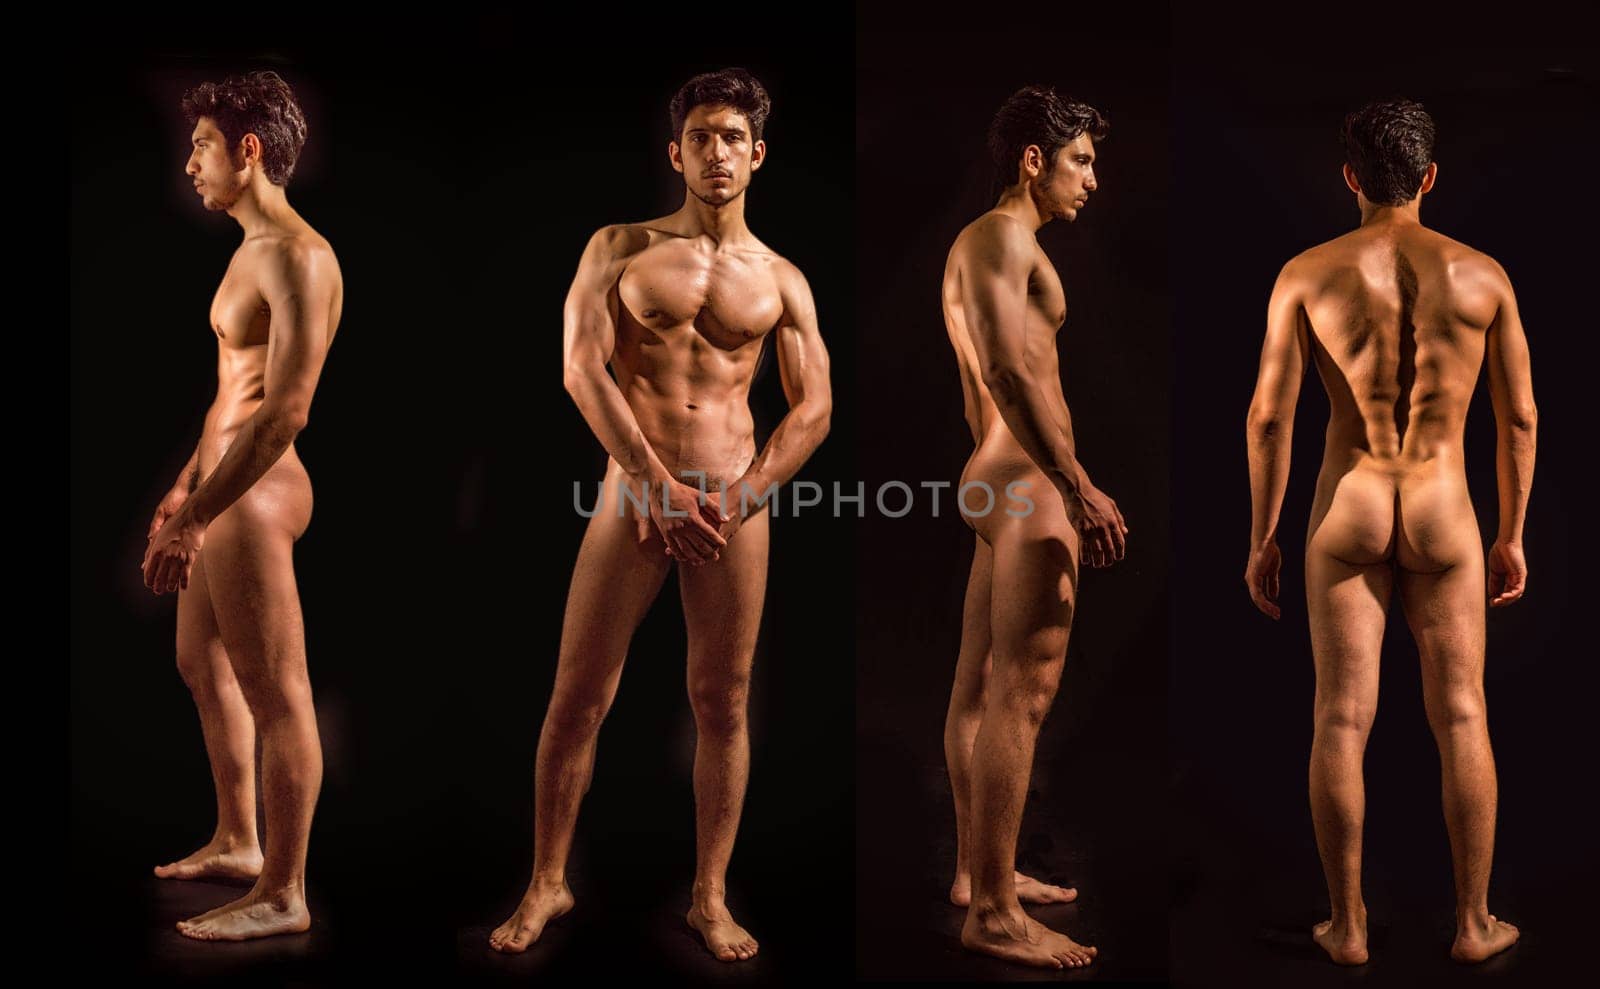 Four views of athletic shirtless, completely naked young man: back, front and profile shot, on grey background, covering genitals with hands, whole length body shots on black background